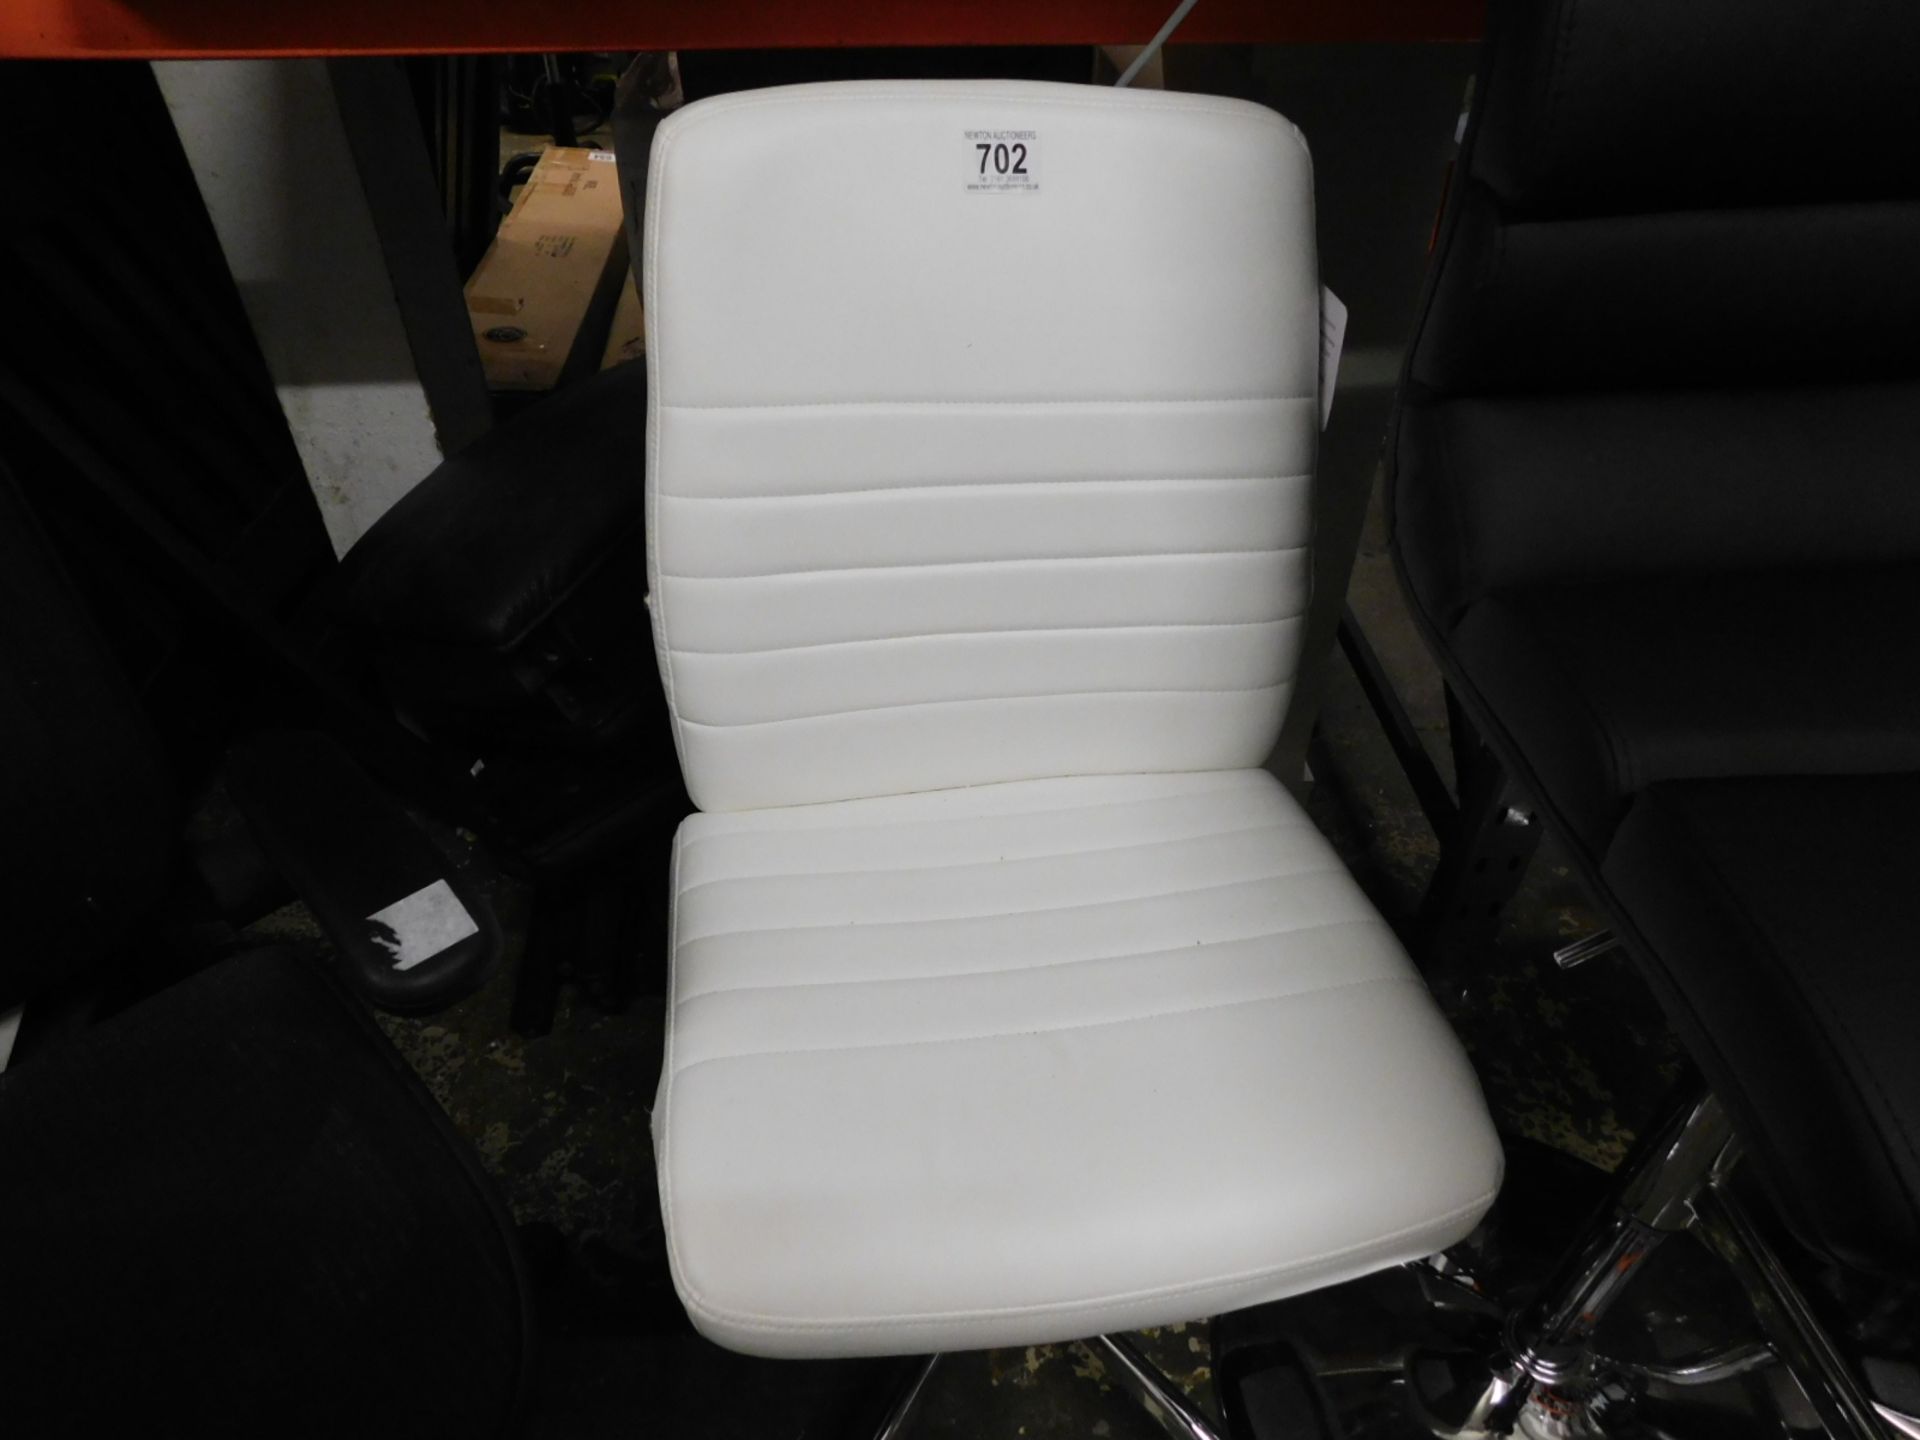 1 GLOBAL FURNITURE WHITE BONDED LEATHER & CHROME OFFICE CHAIR RRP £79.99